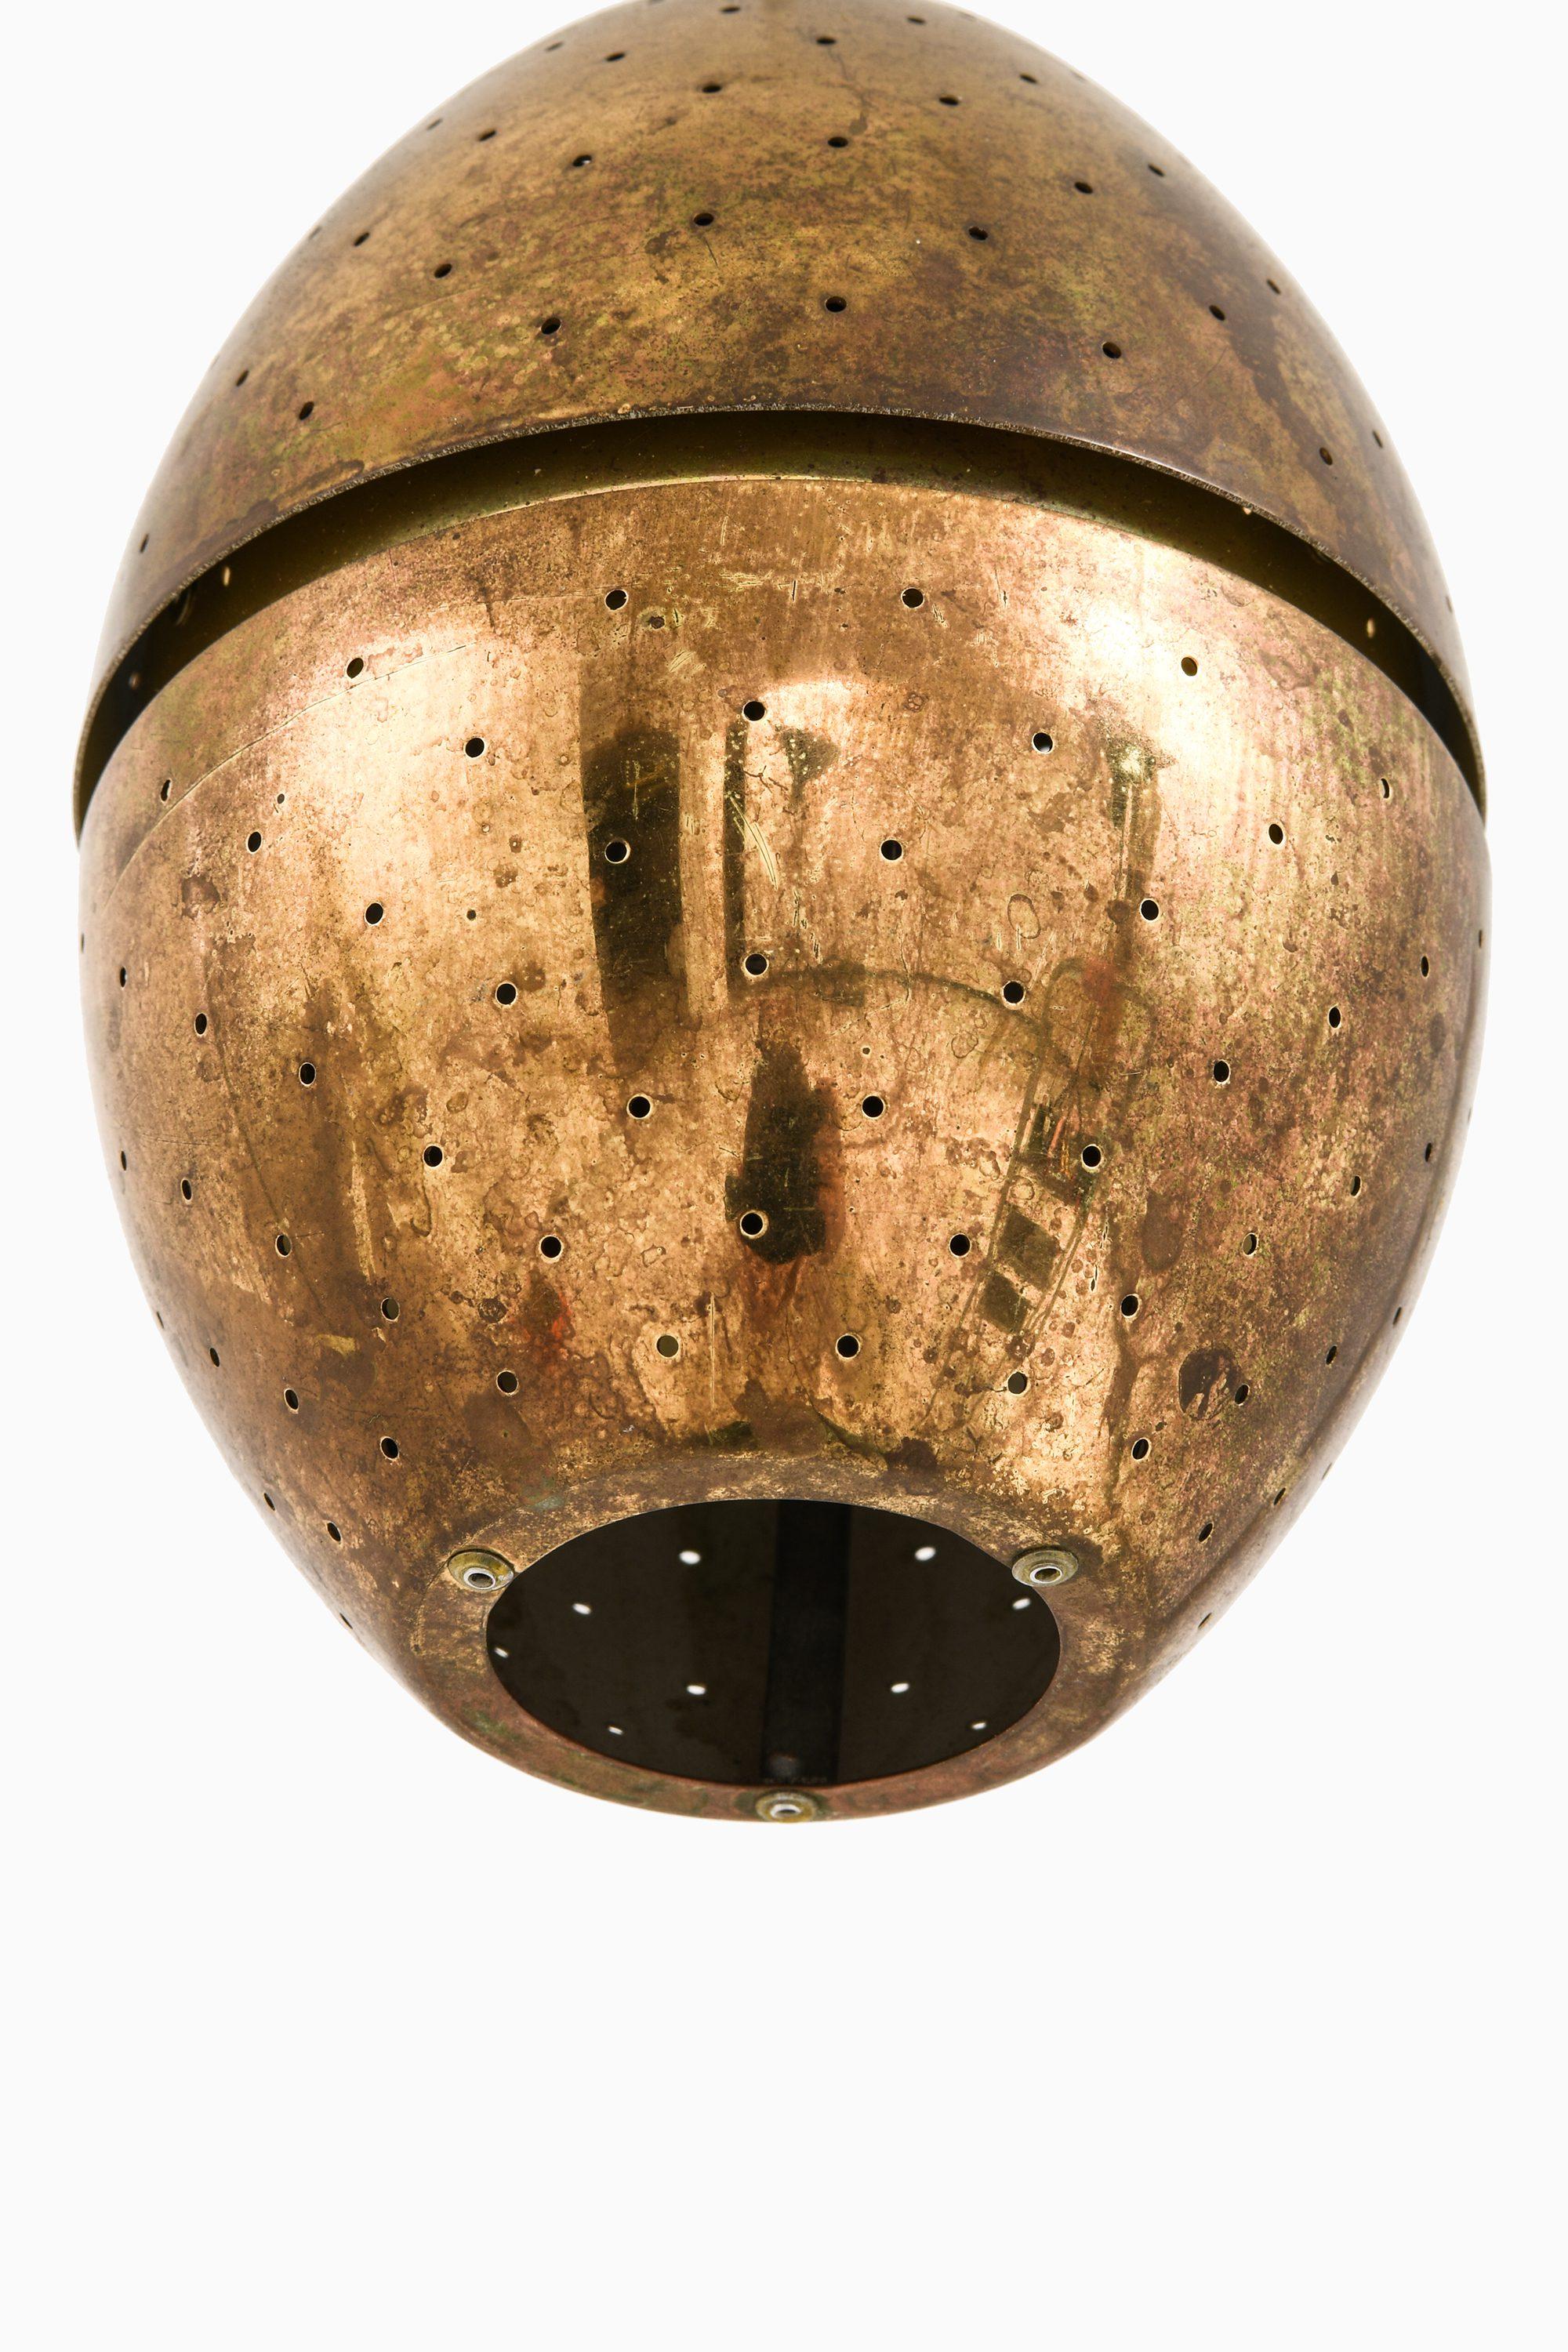 Ceiling Lamp in Brass by Hans-Agne Jakobsson, 1950's

Additional Information:
Material: Brass
Style: Mid century, Scandinavia
Produced by Hans-Agne Jakobsson in Markaryd, Sweden
Dimensions (Ø x H): 10.5 x 14 cm
Condition: Good vintage condition,